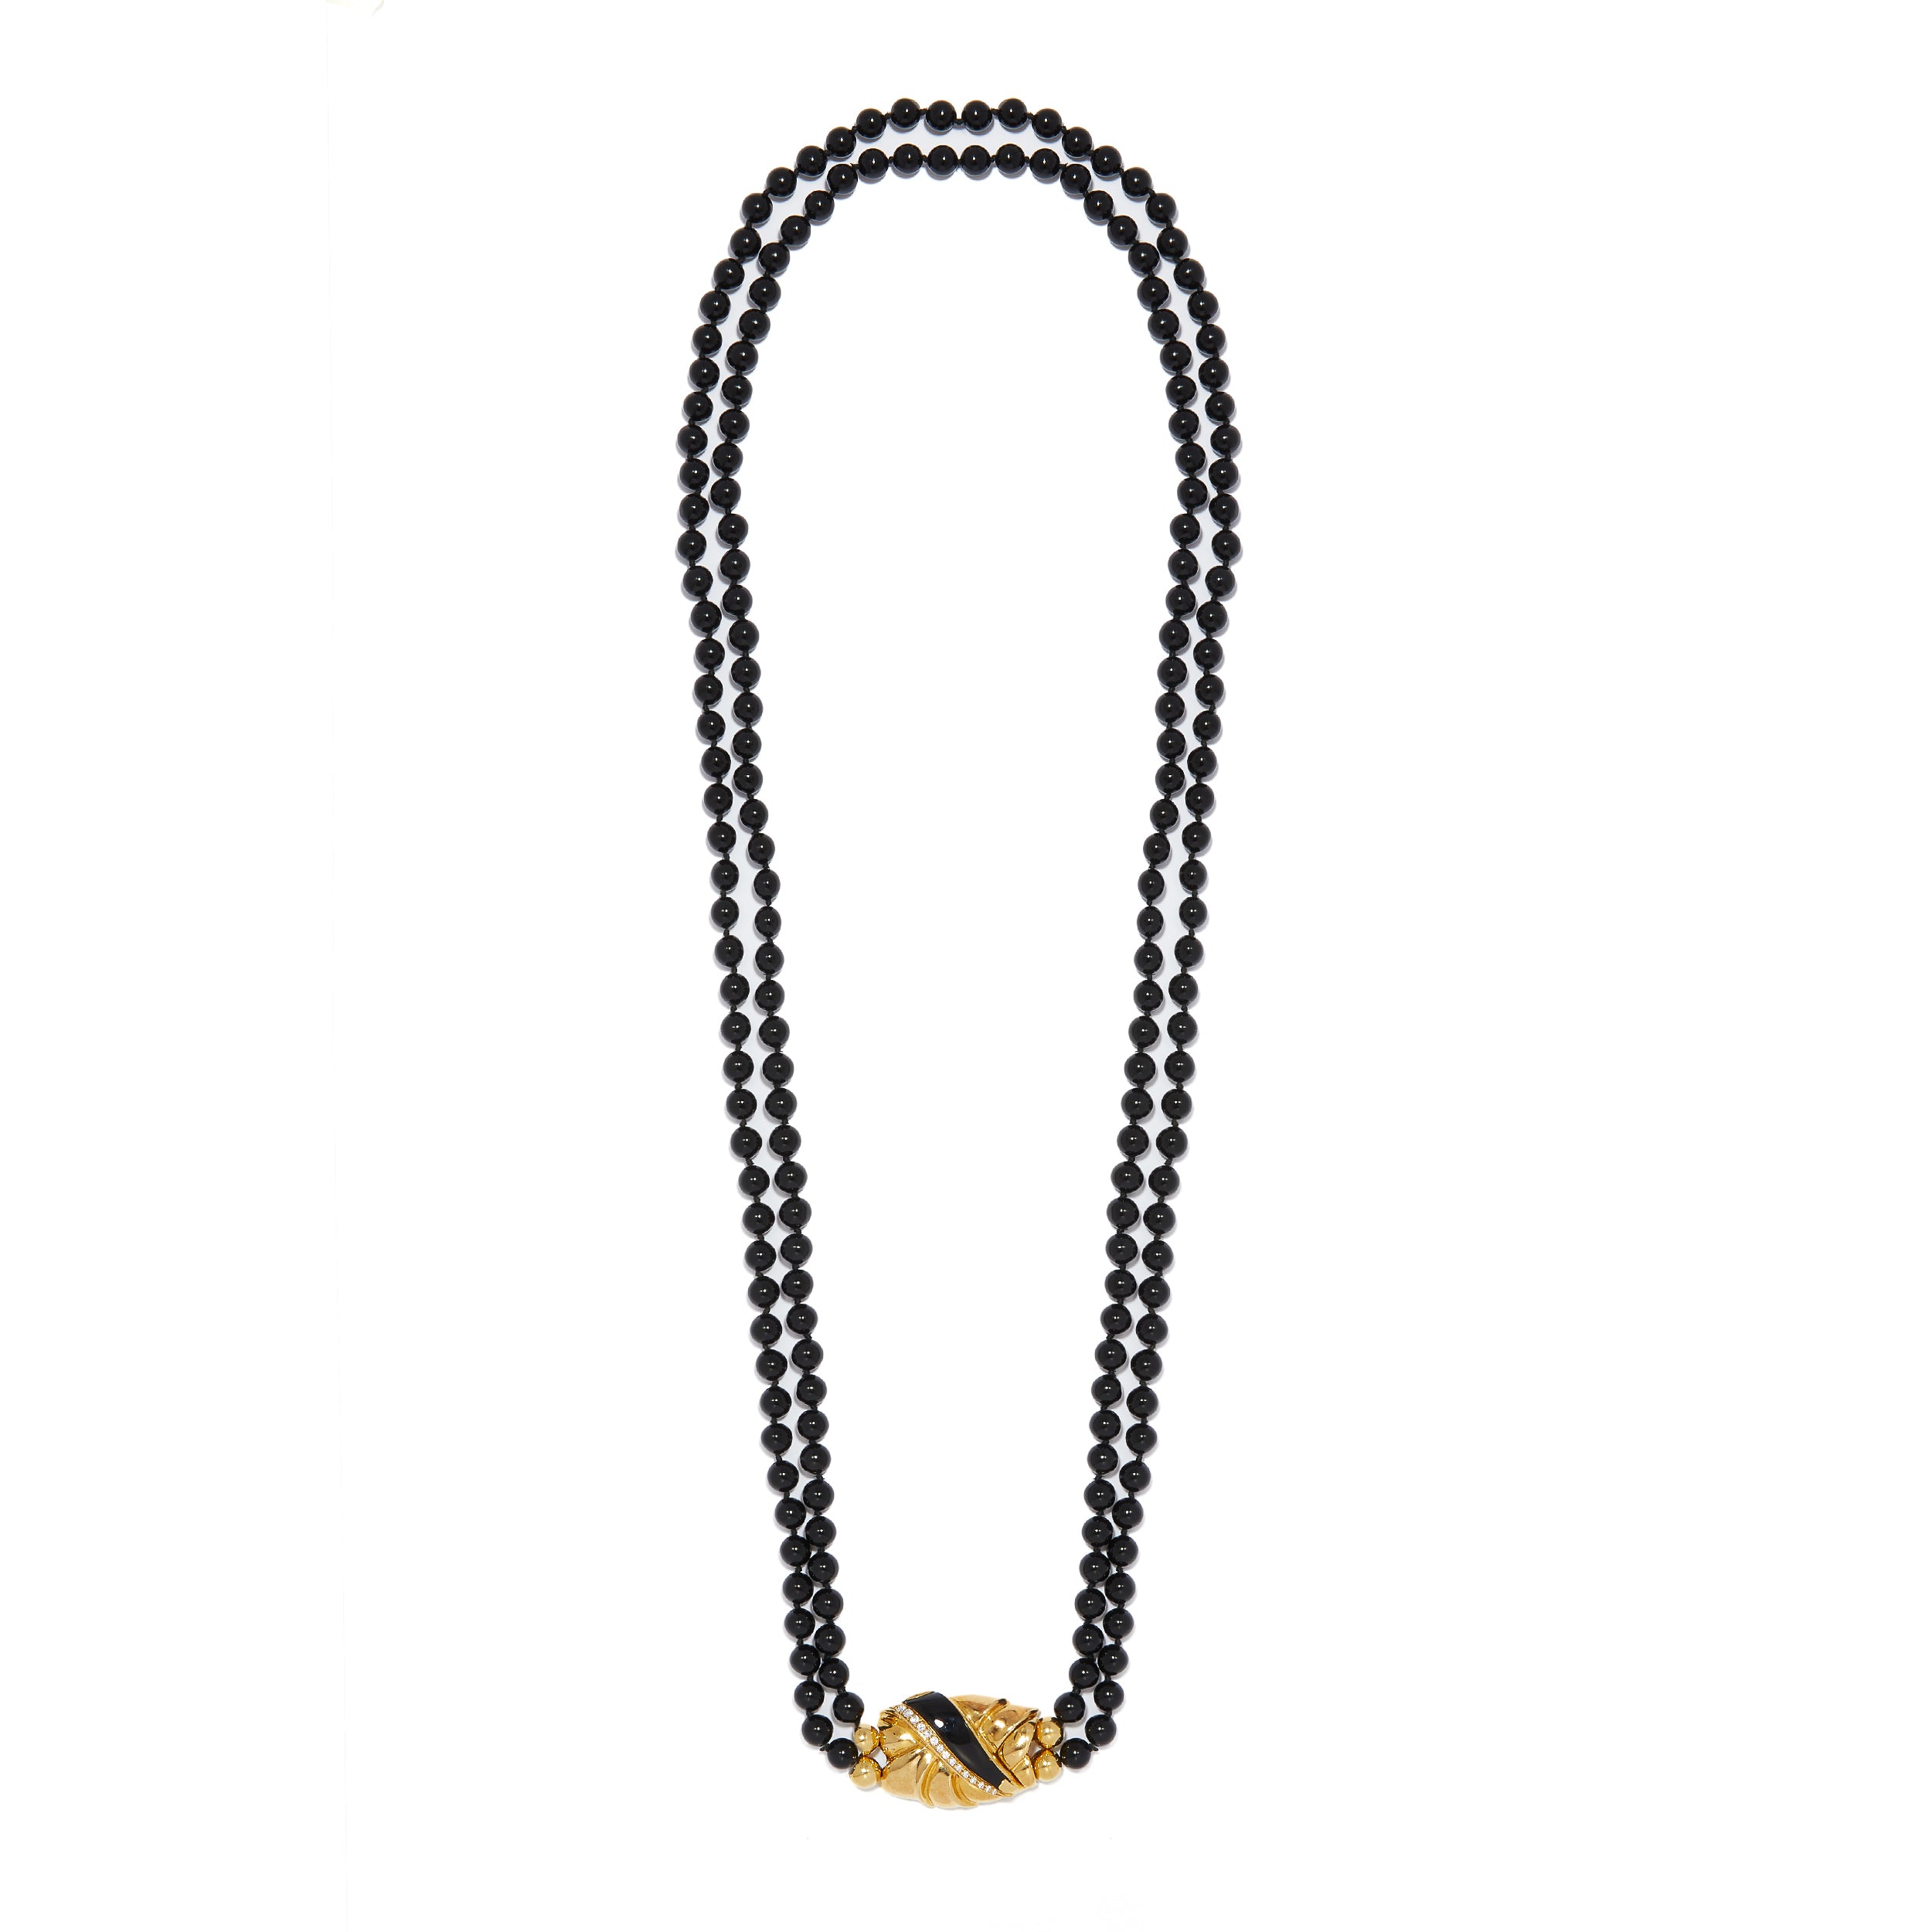 Double-Strand Black Onyx Beaded Necklace With 18ct Gold Clasp